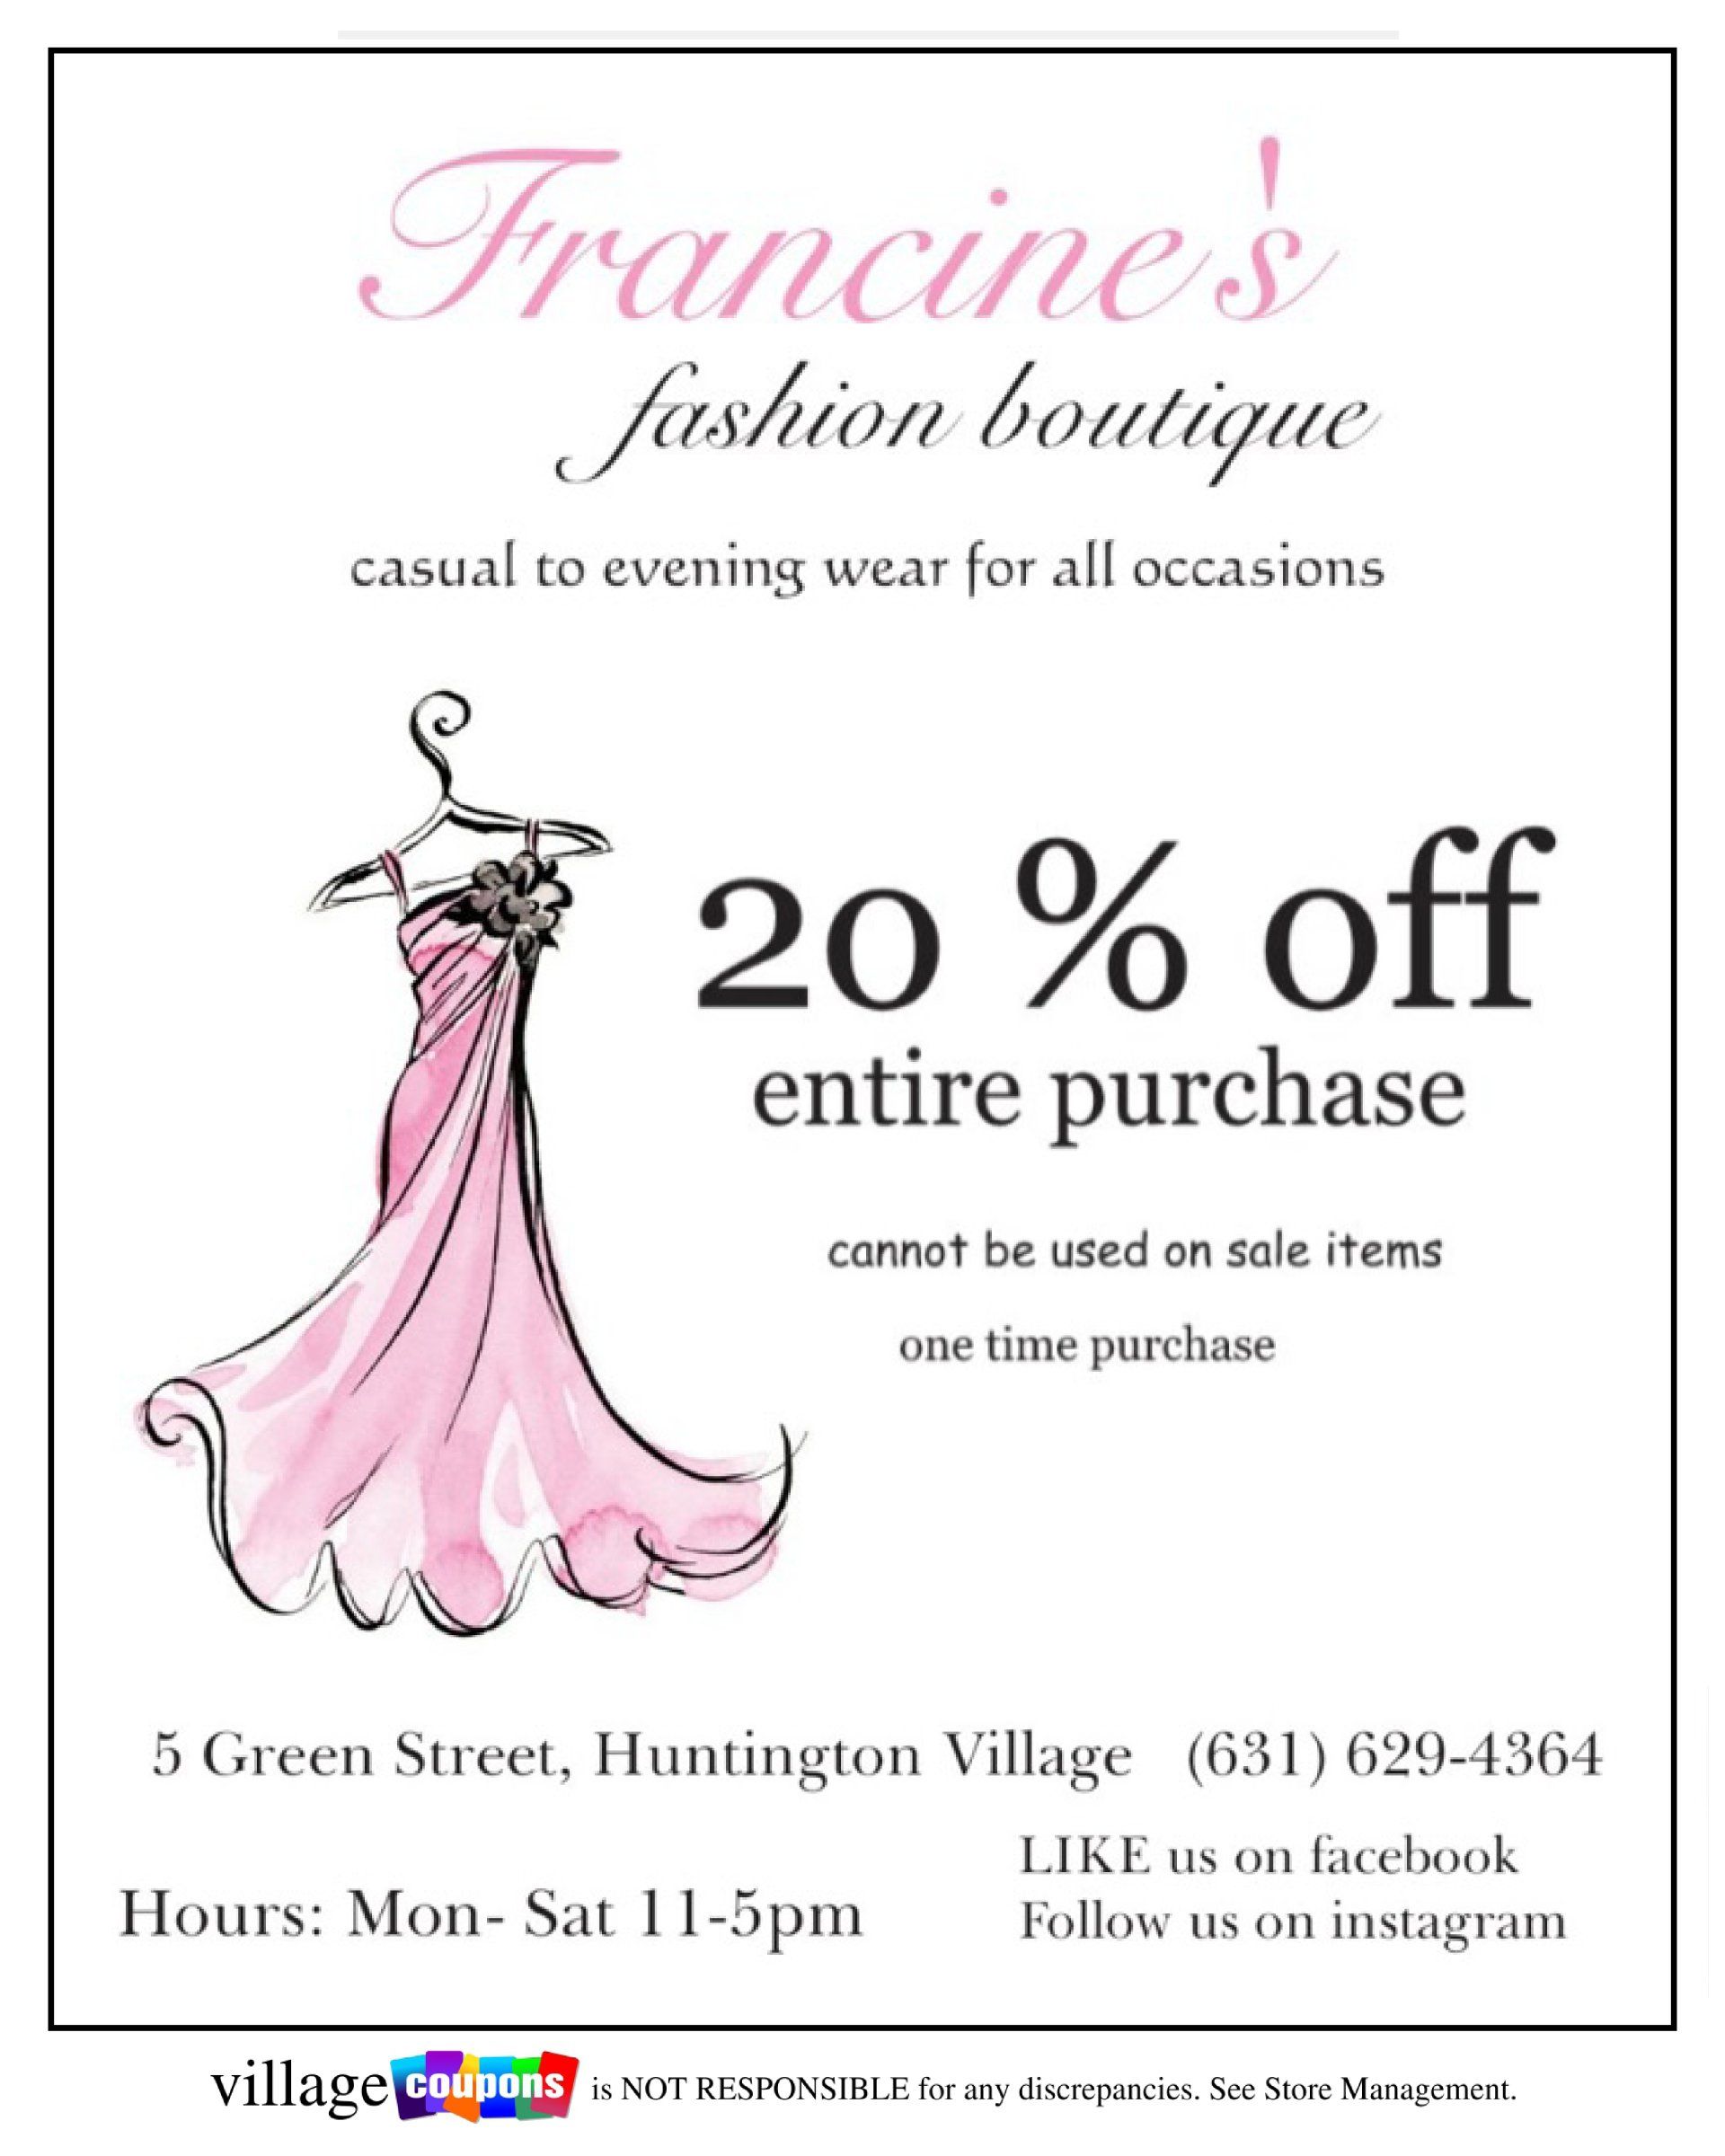 An advertisement for francine 's fashion boutique offers a 20 % off entire purchase